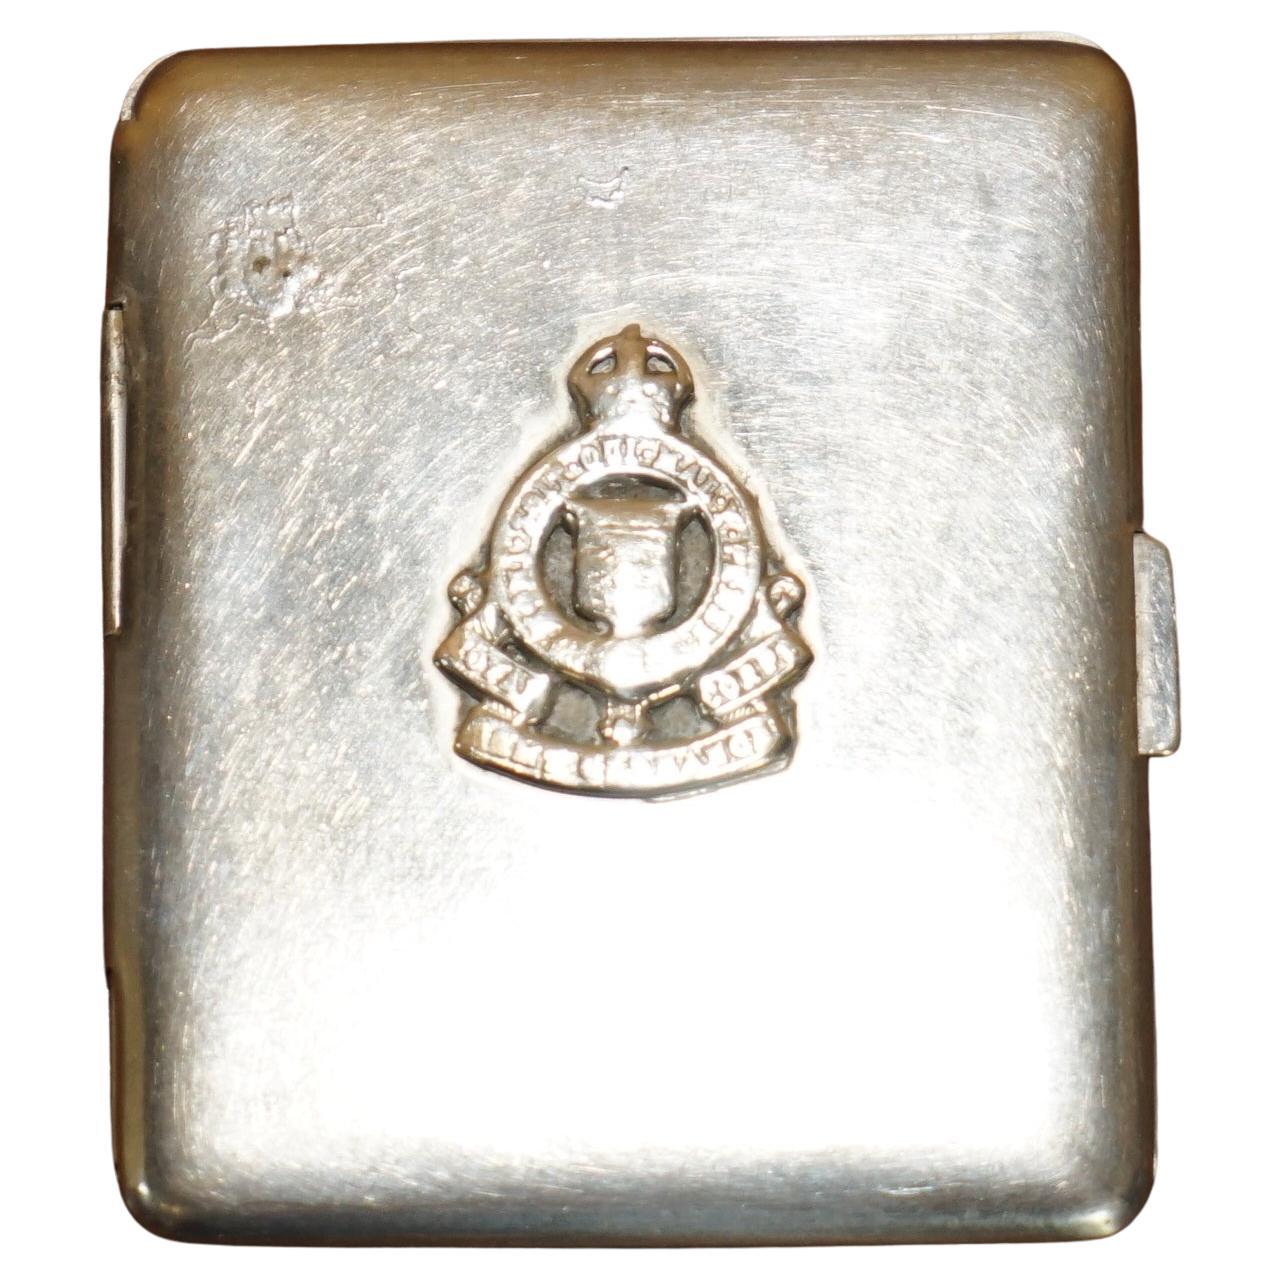 WW2 SILVER PLATED ROYAL CANADiAN ORDNANCE CORPS BADGE ON CIGARETTE CASE